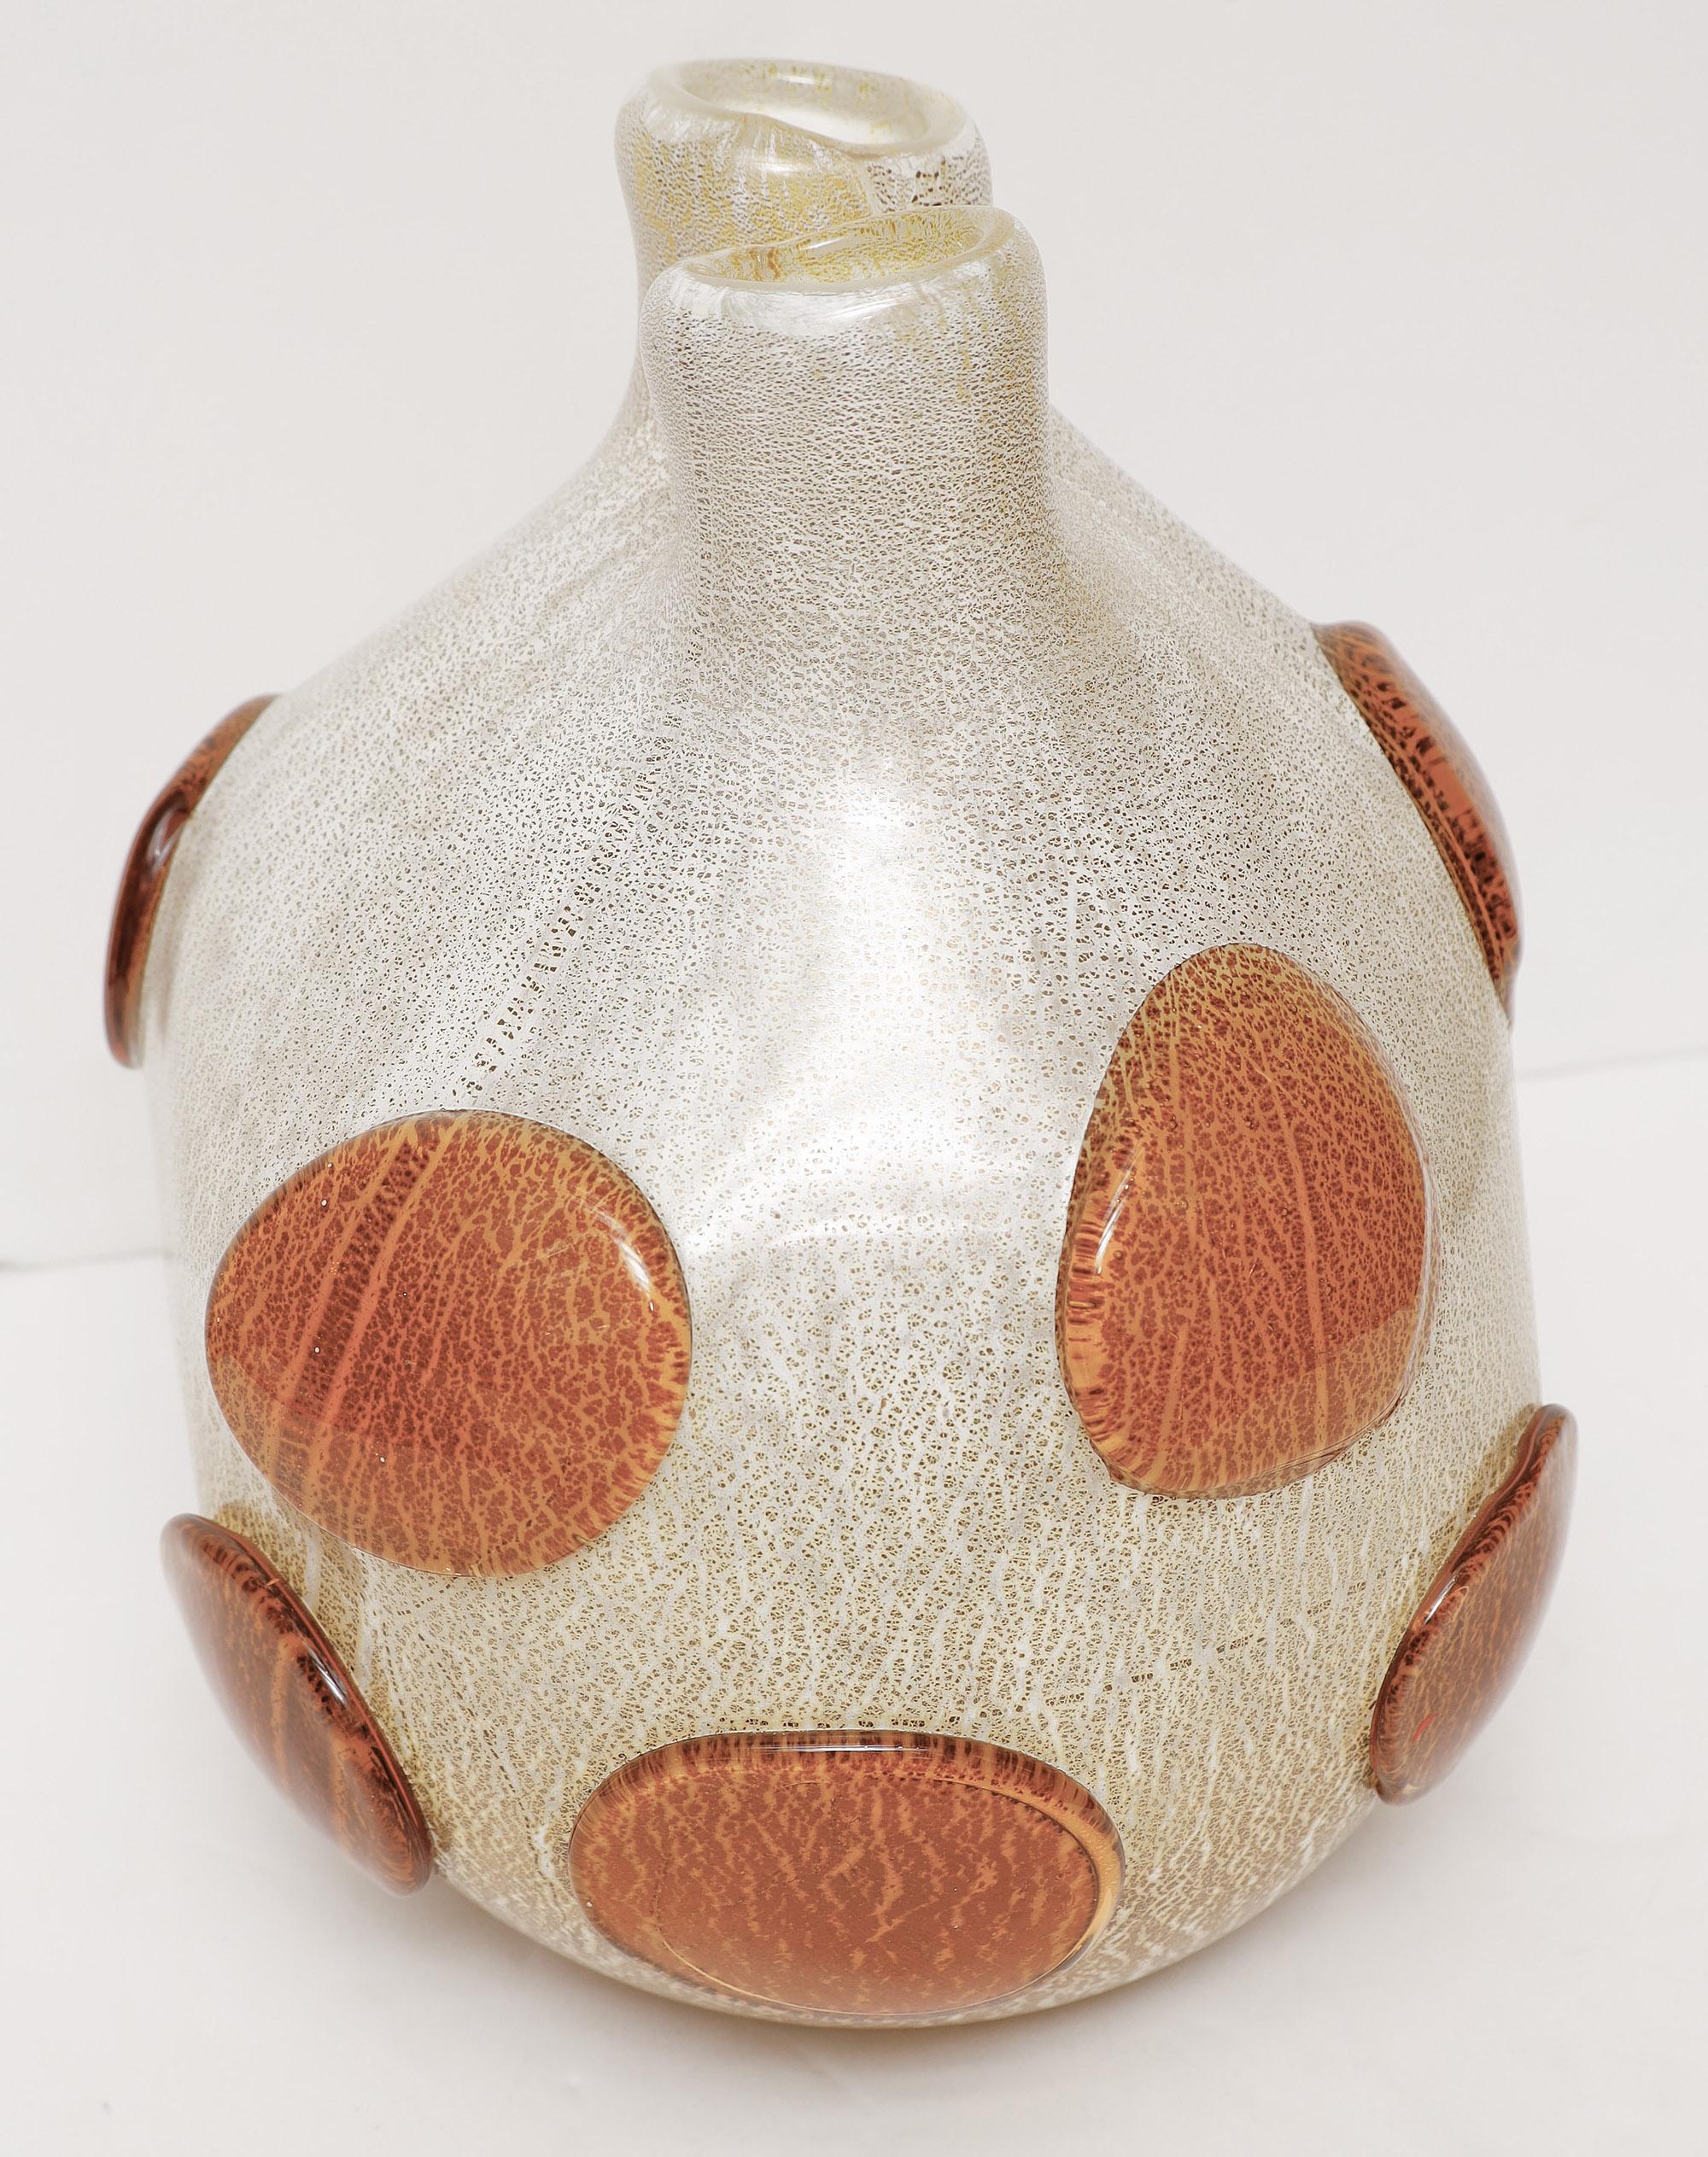 Large and exquisite signed Constantini hand-blown vase in gold-infused white cased Murano glass with rich caramel colored applied decoration, circa 1980.